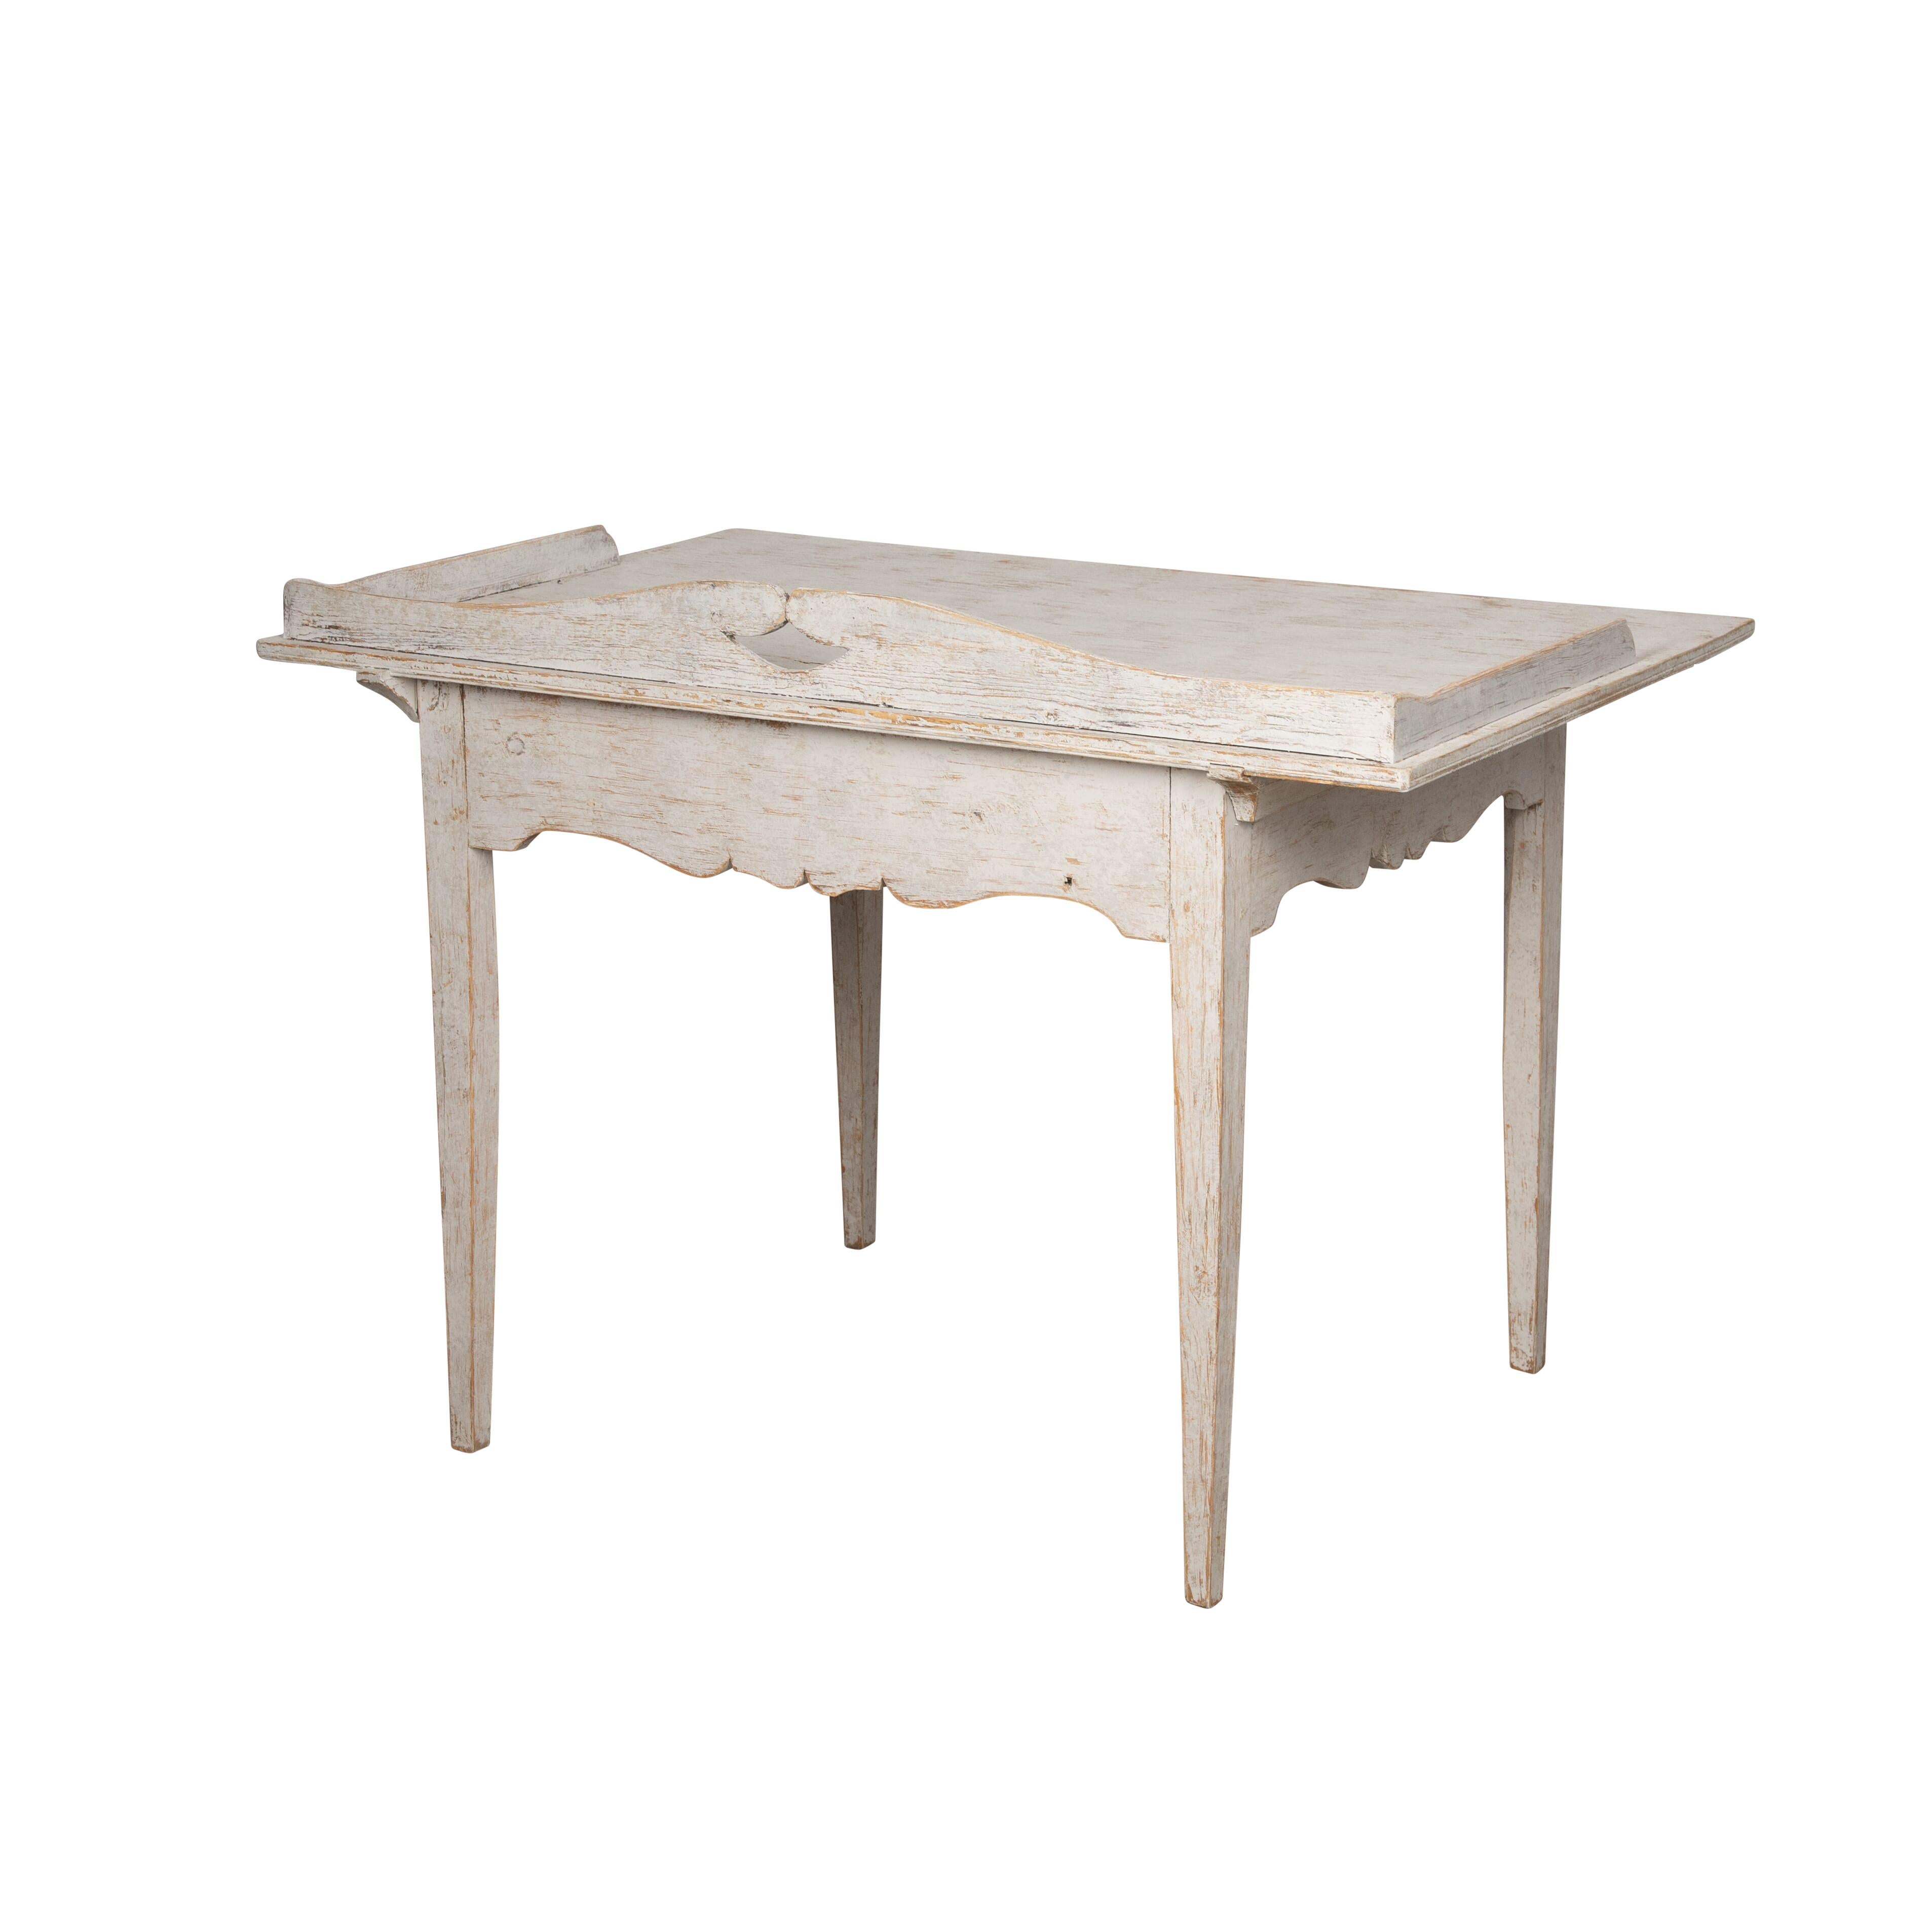 Mid 19th Century desk with galleried top.
With one drawer and repainted in light grey.
Circa 1860. 